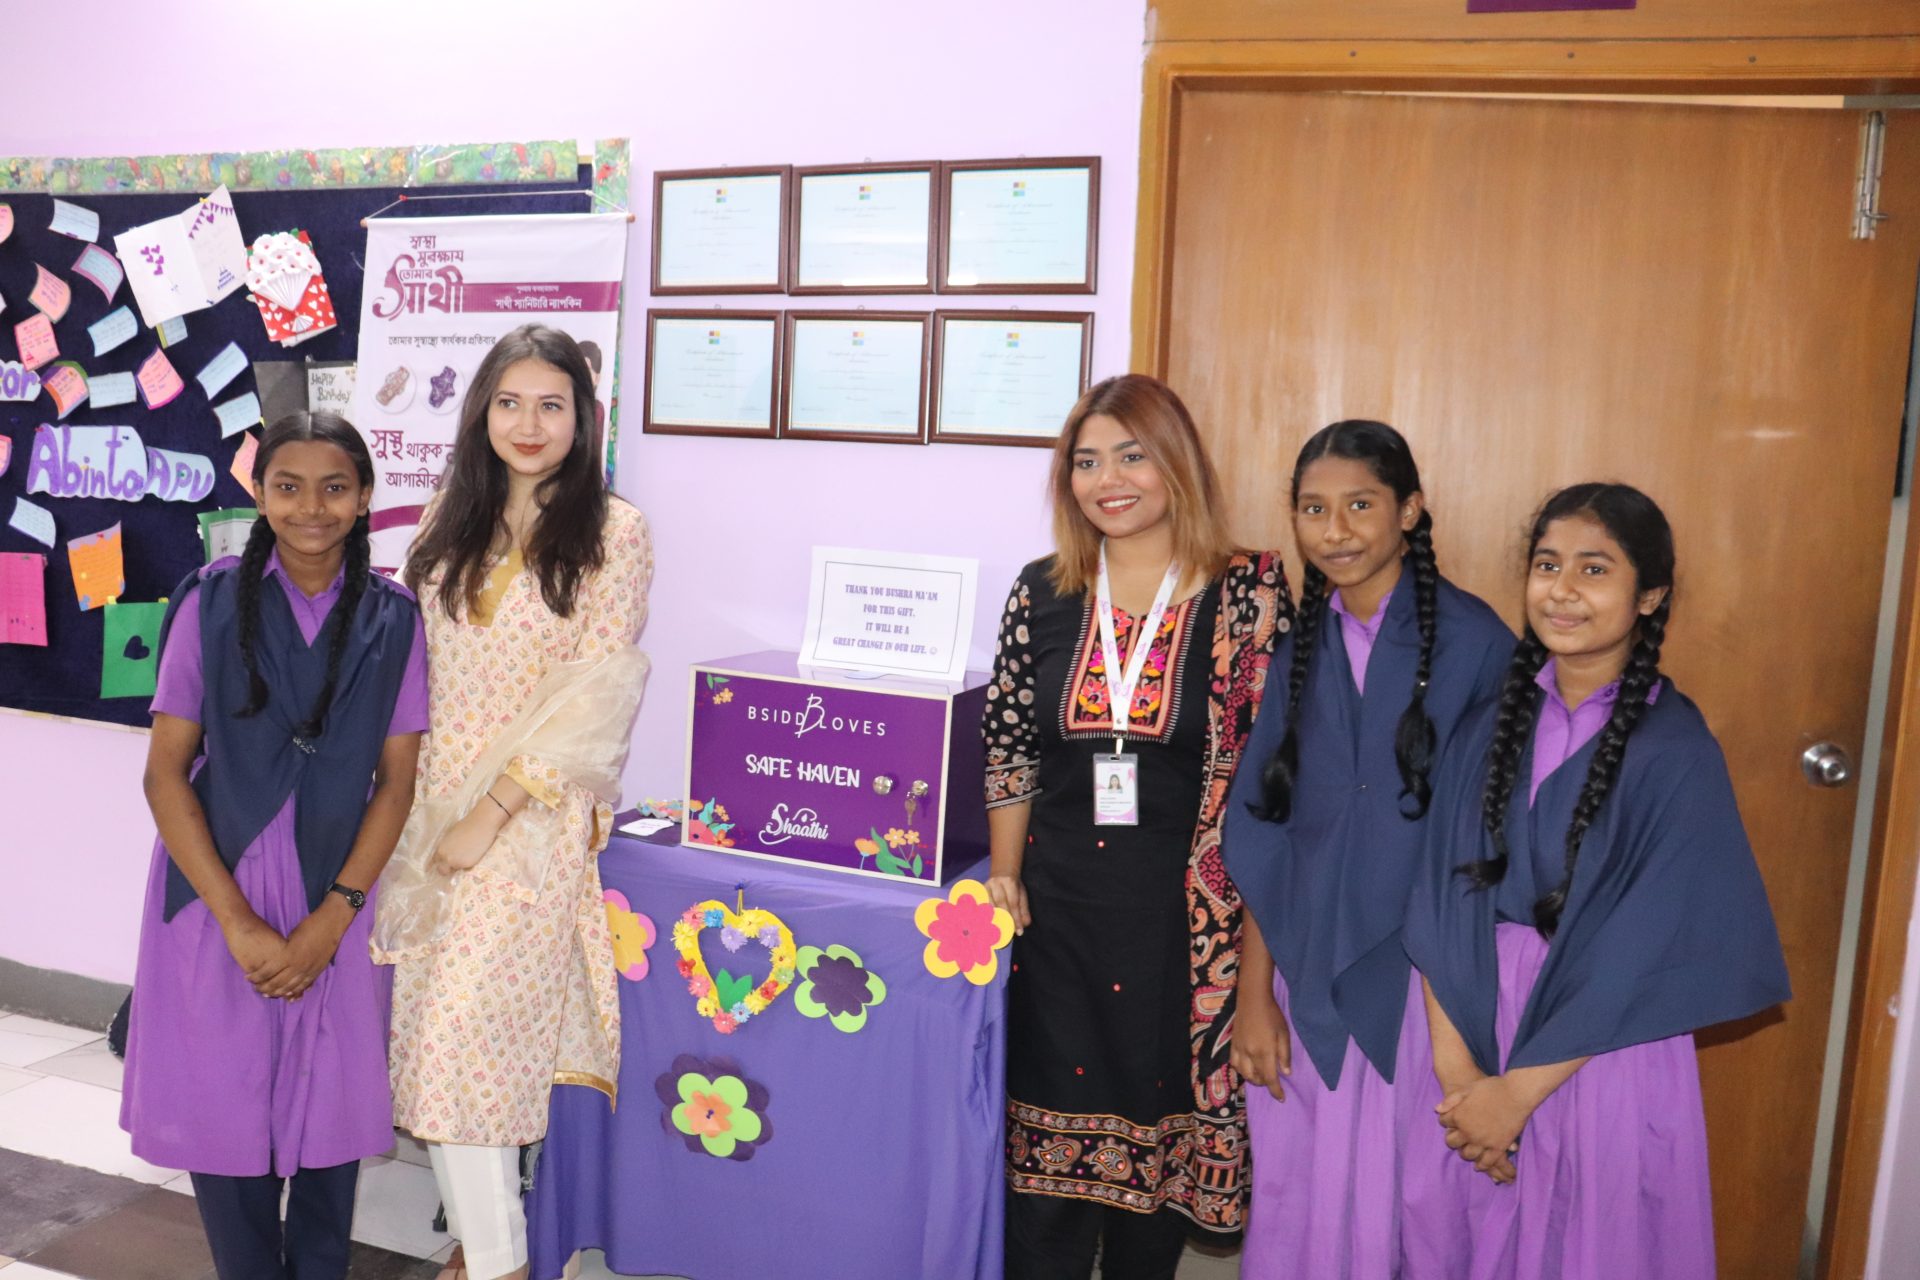 Bushra Siddique, a popular Instagram influencer (@bsiddlife) visited the school to donate a reusable sanitary napkins bank as a project through Shaathi Bangladesh Ltd.